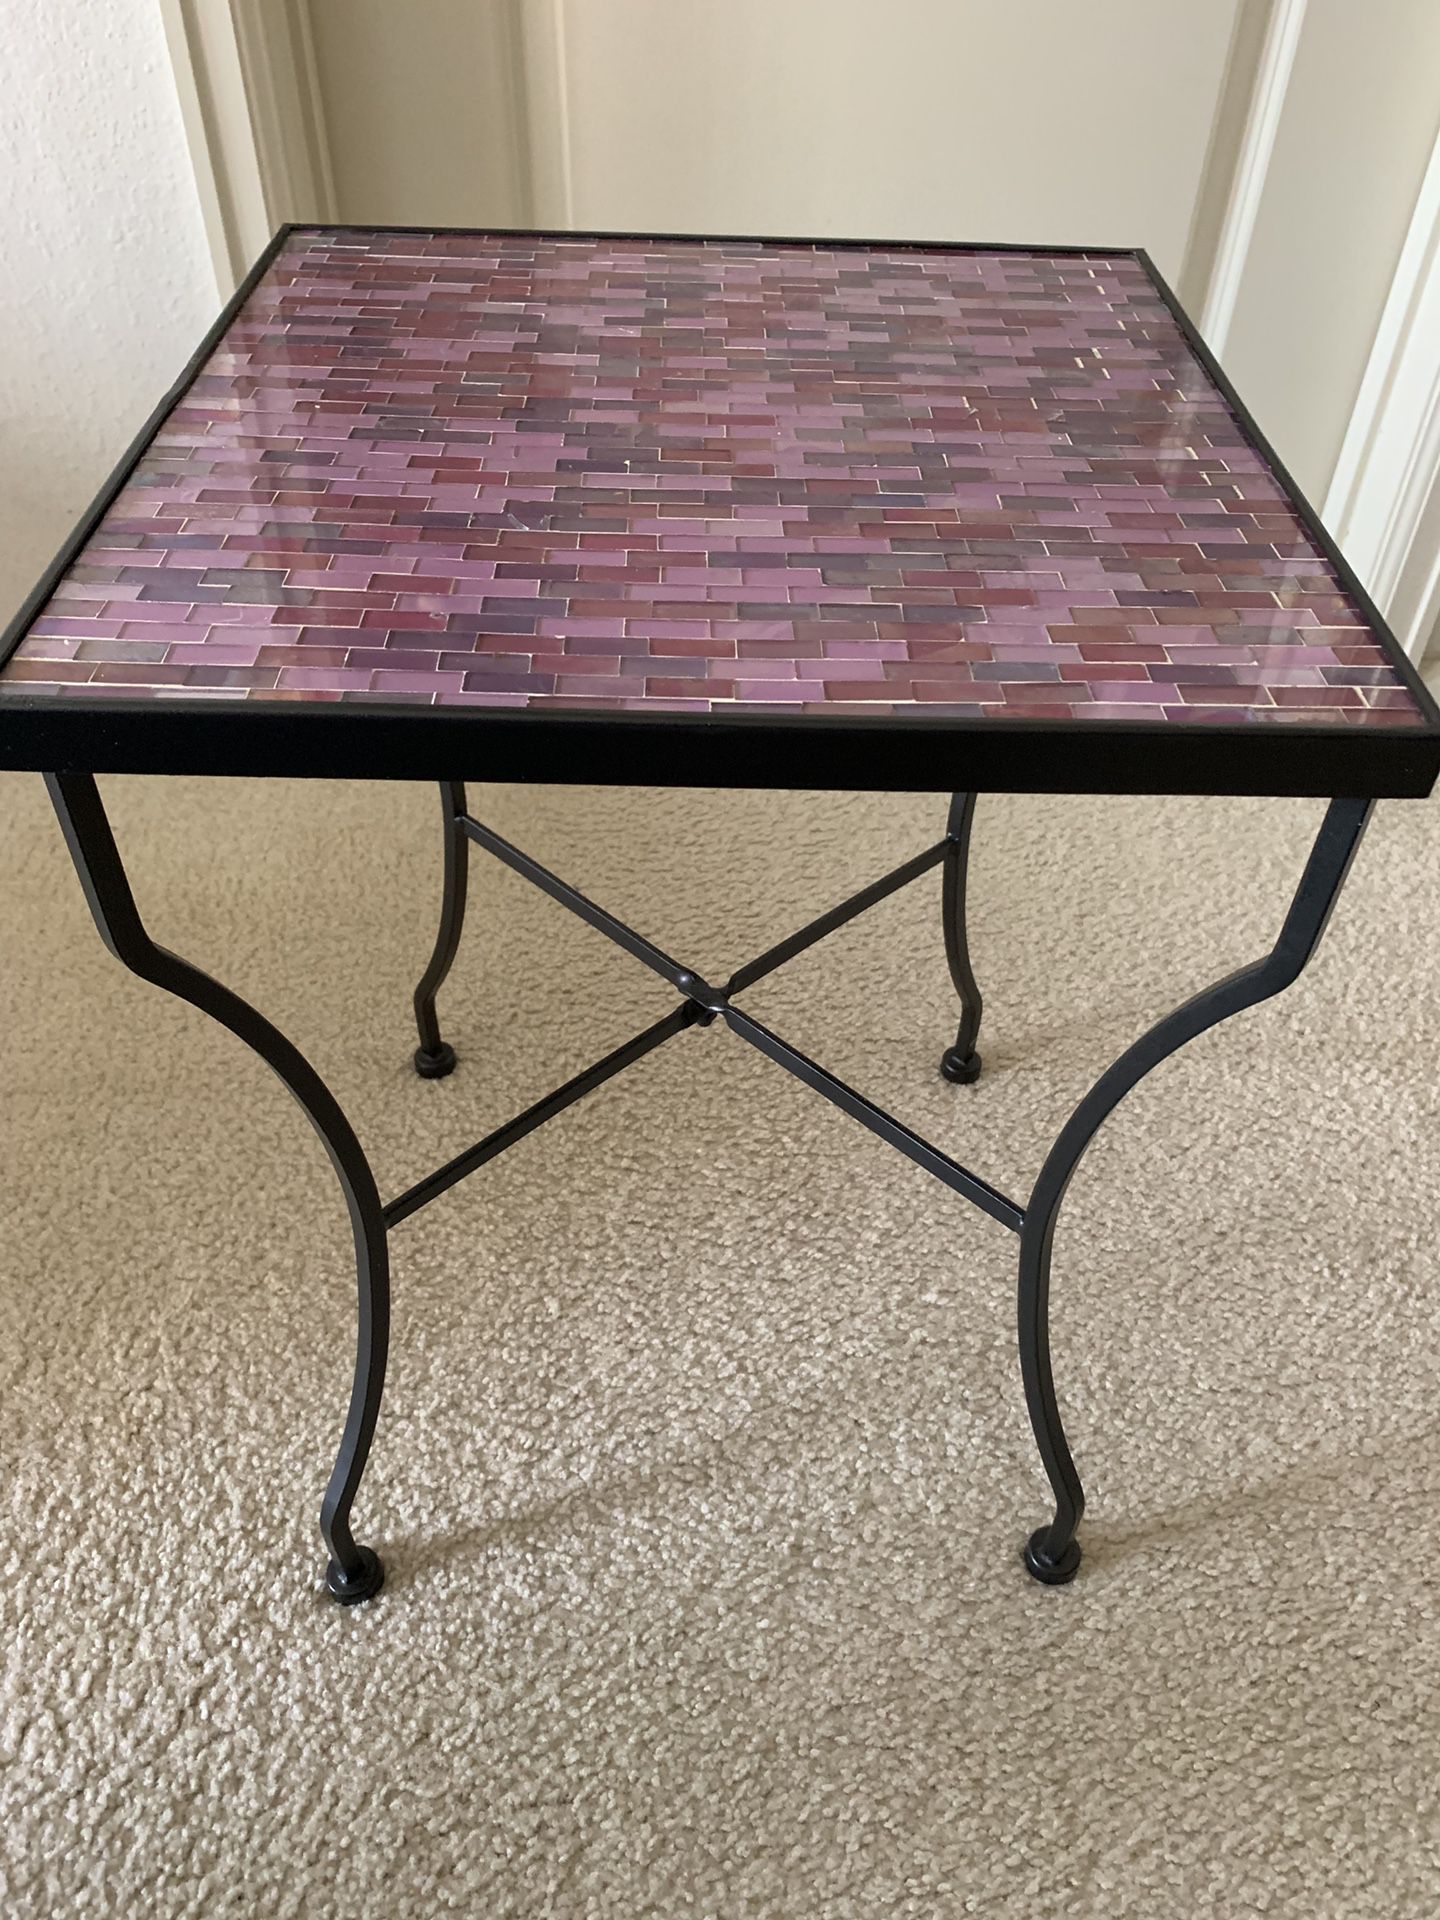 Pair of Coffee tables - metal (pick up only)